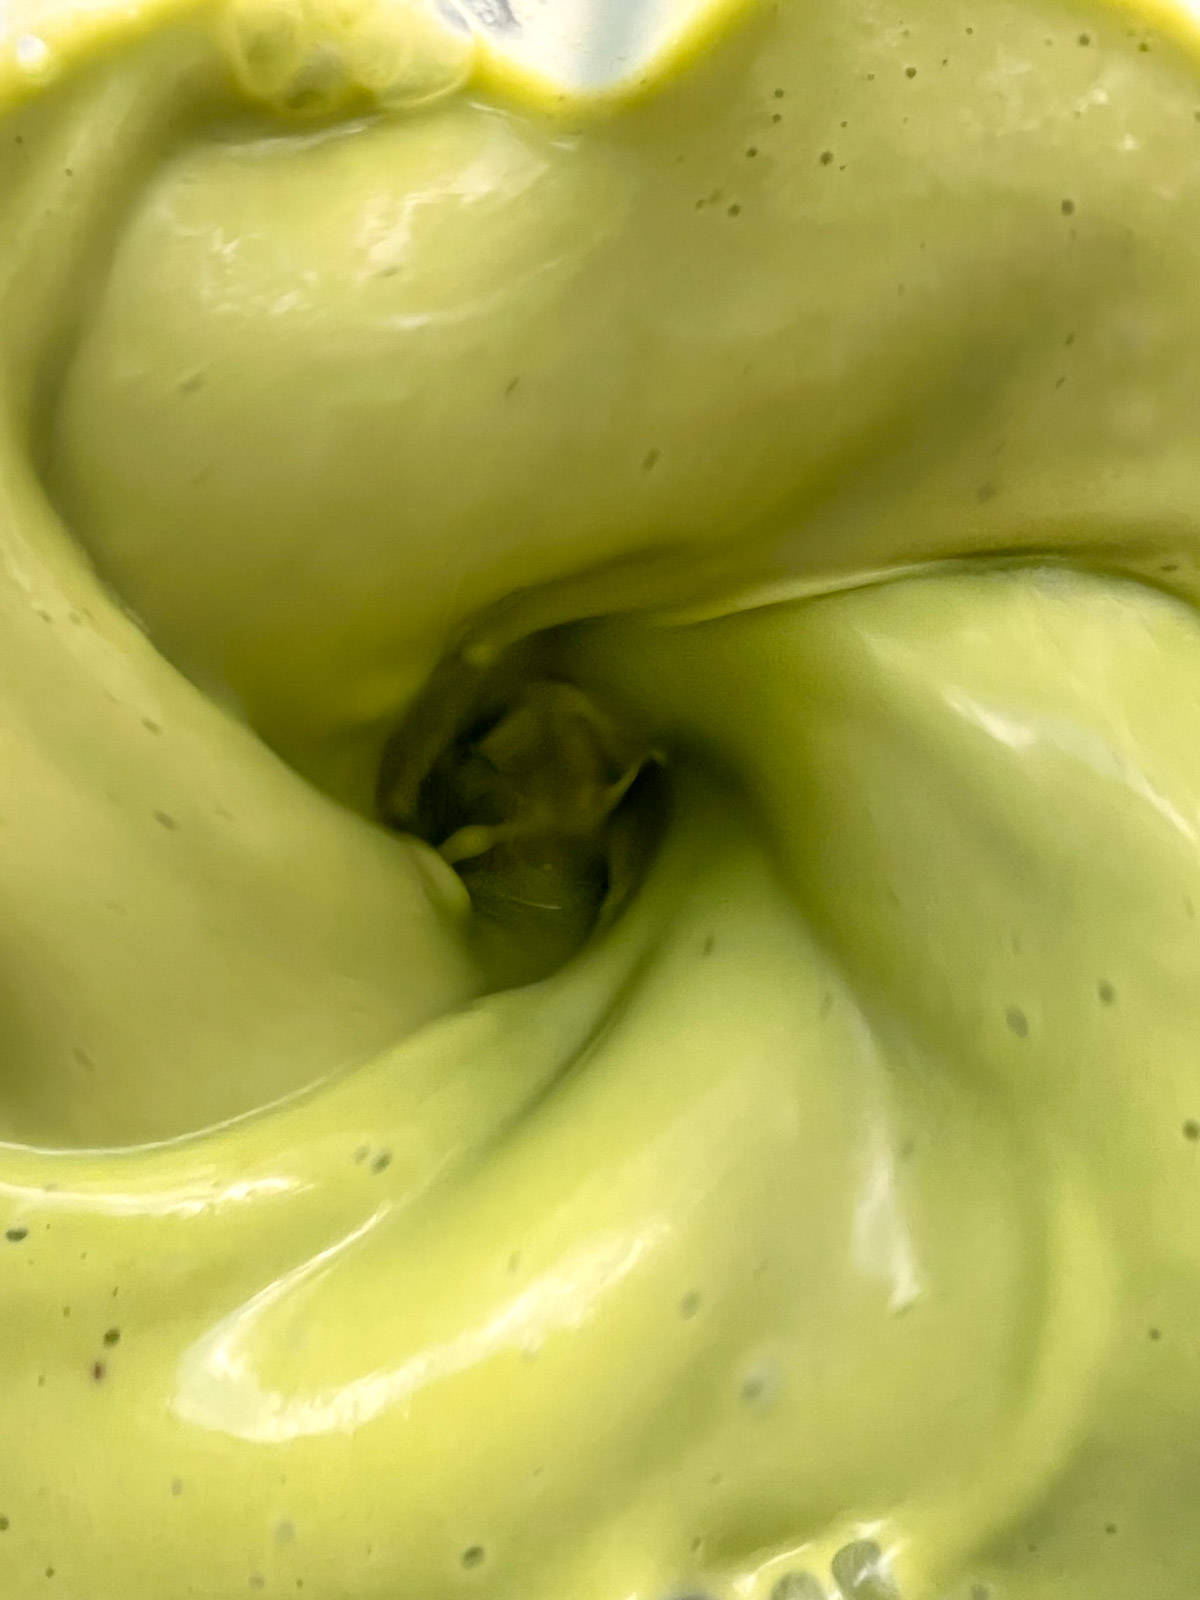 A close up image of a green smoothie in a blender canister as it is being blended.